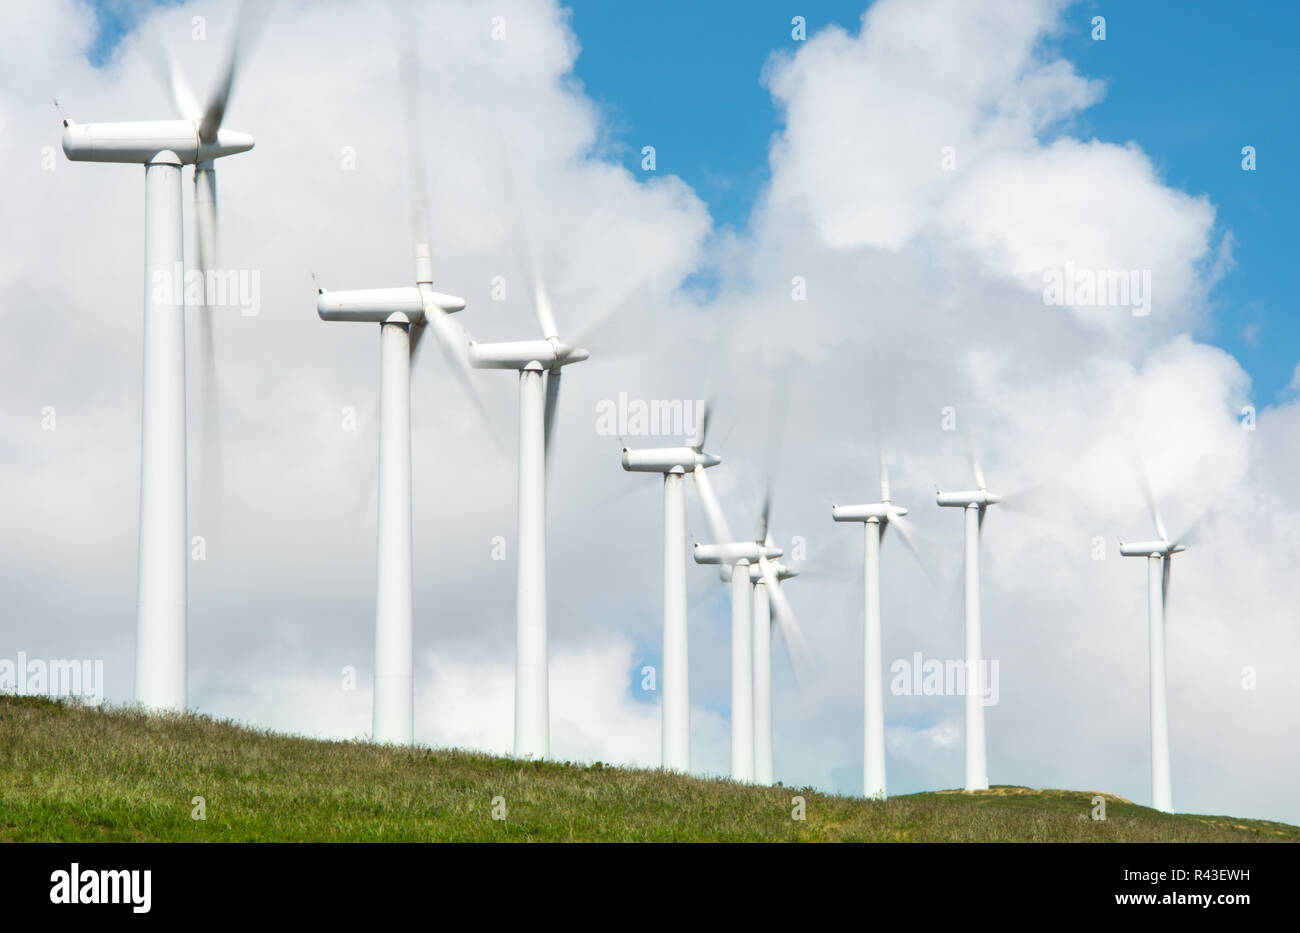 onshore wind turbines for electricity generation in wind farm Stock Photo